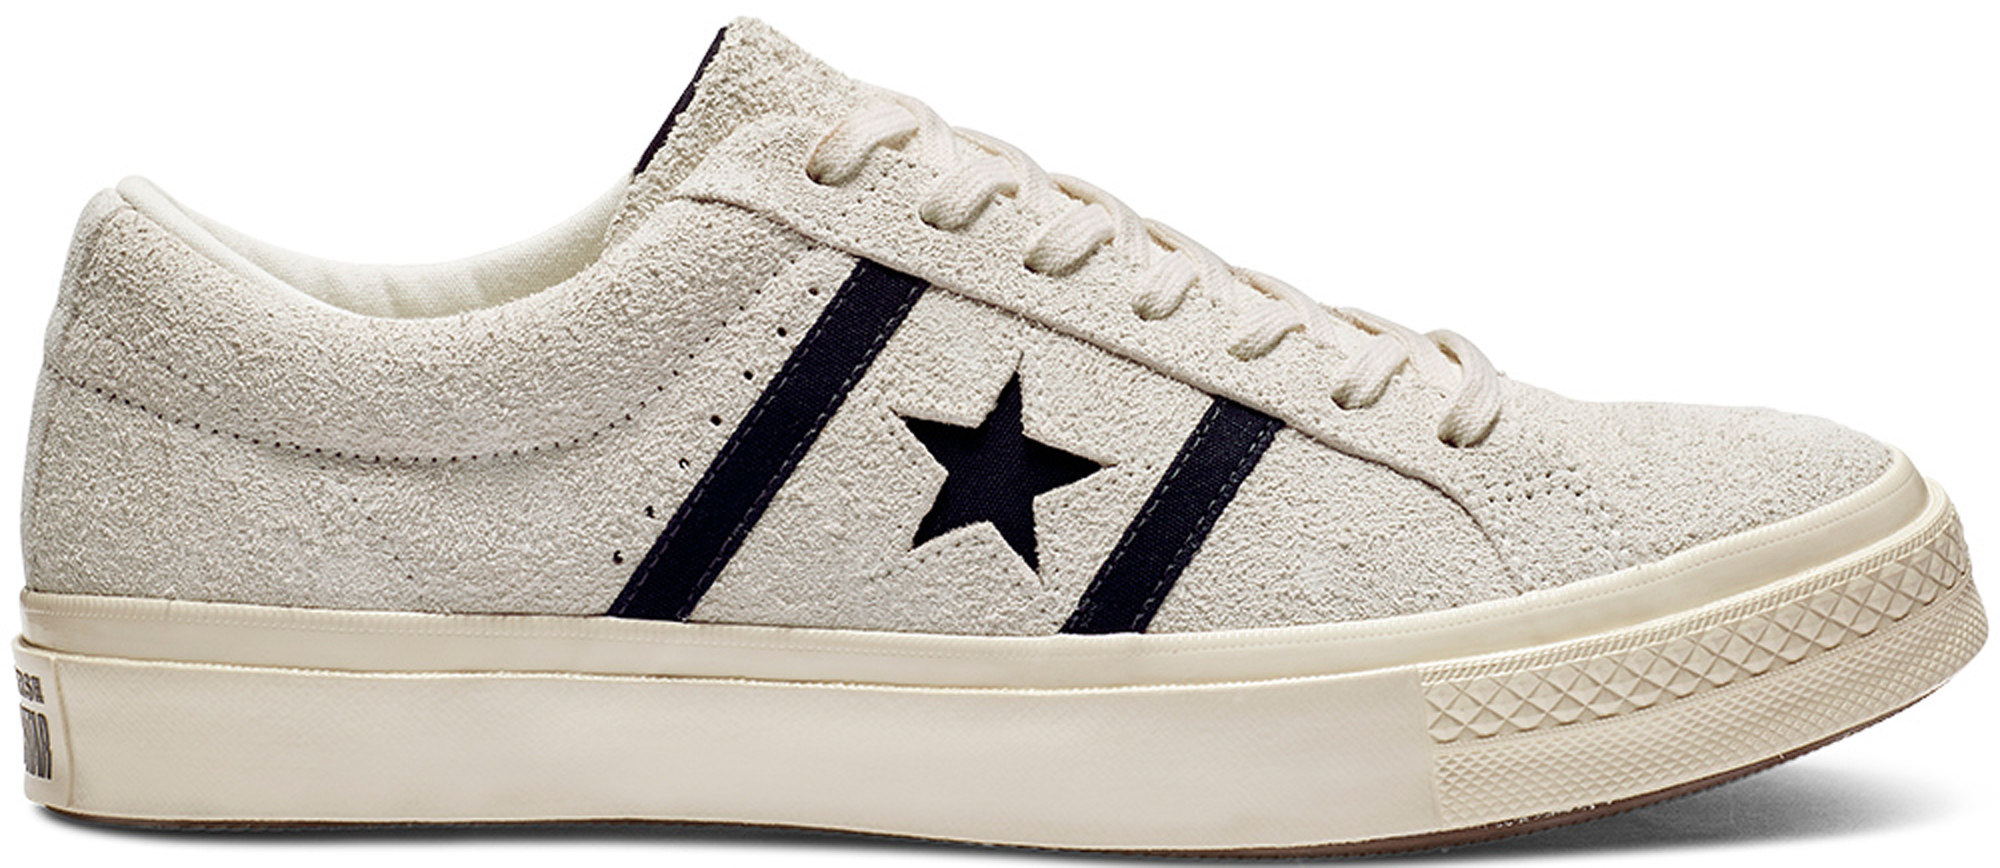 converse one star one flap